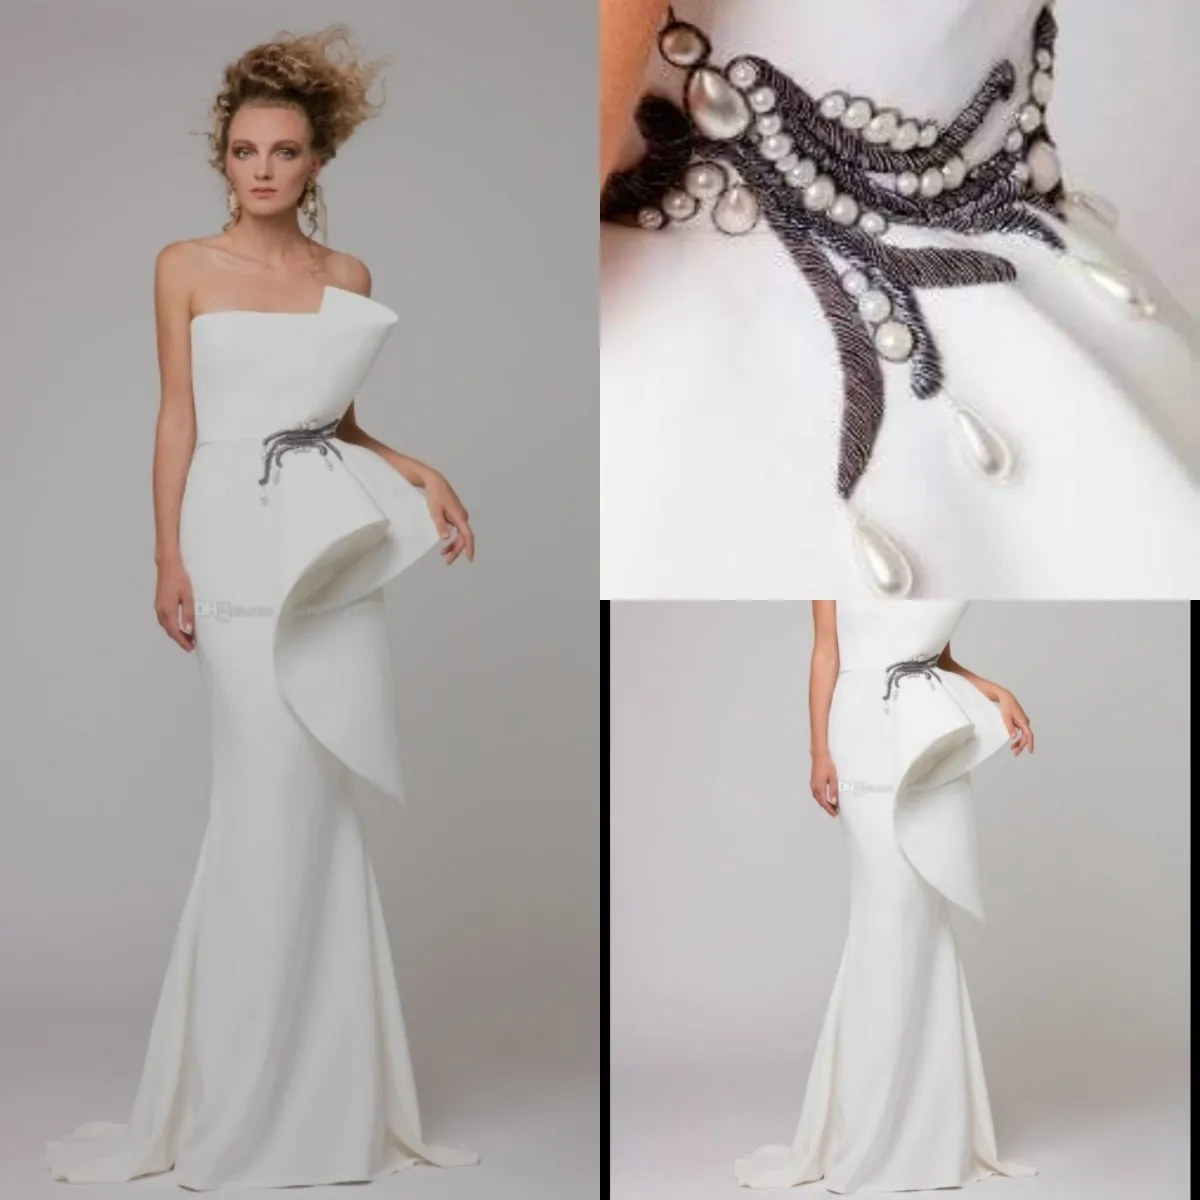 Mermaid Unique White Evening Dresses Strapless Pearls Cheap South African Satin Plus Size Prom Gowns Formal Party Dress